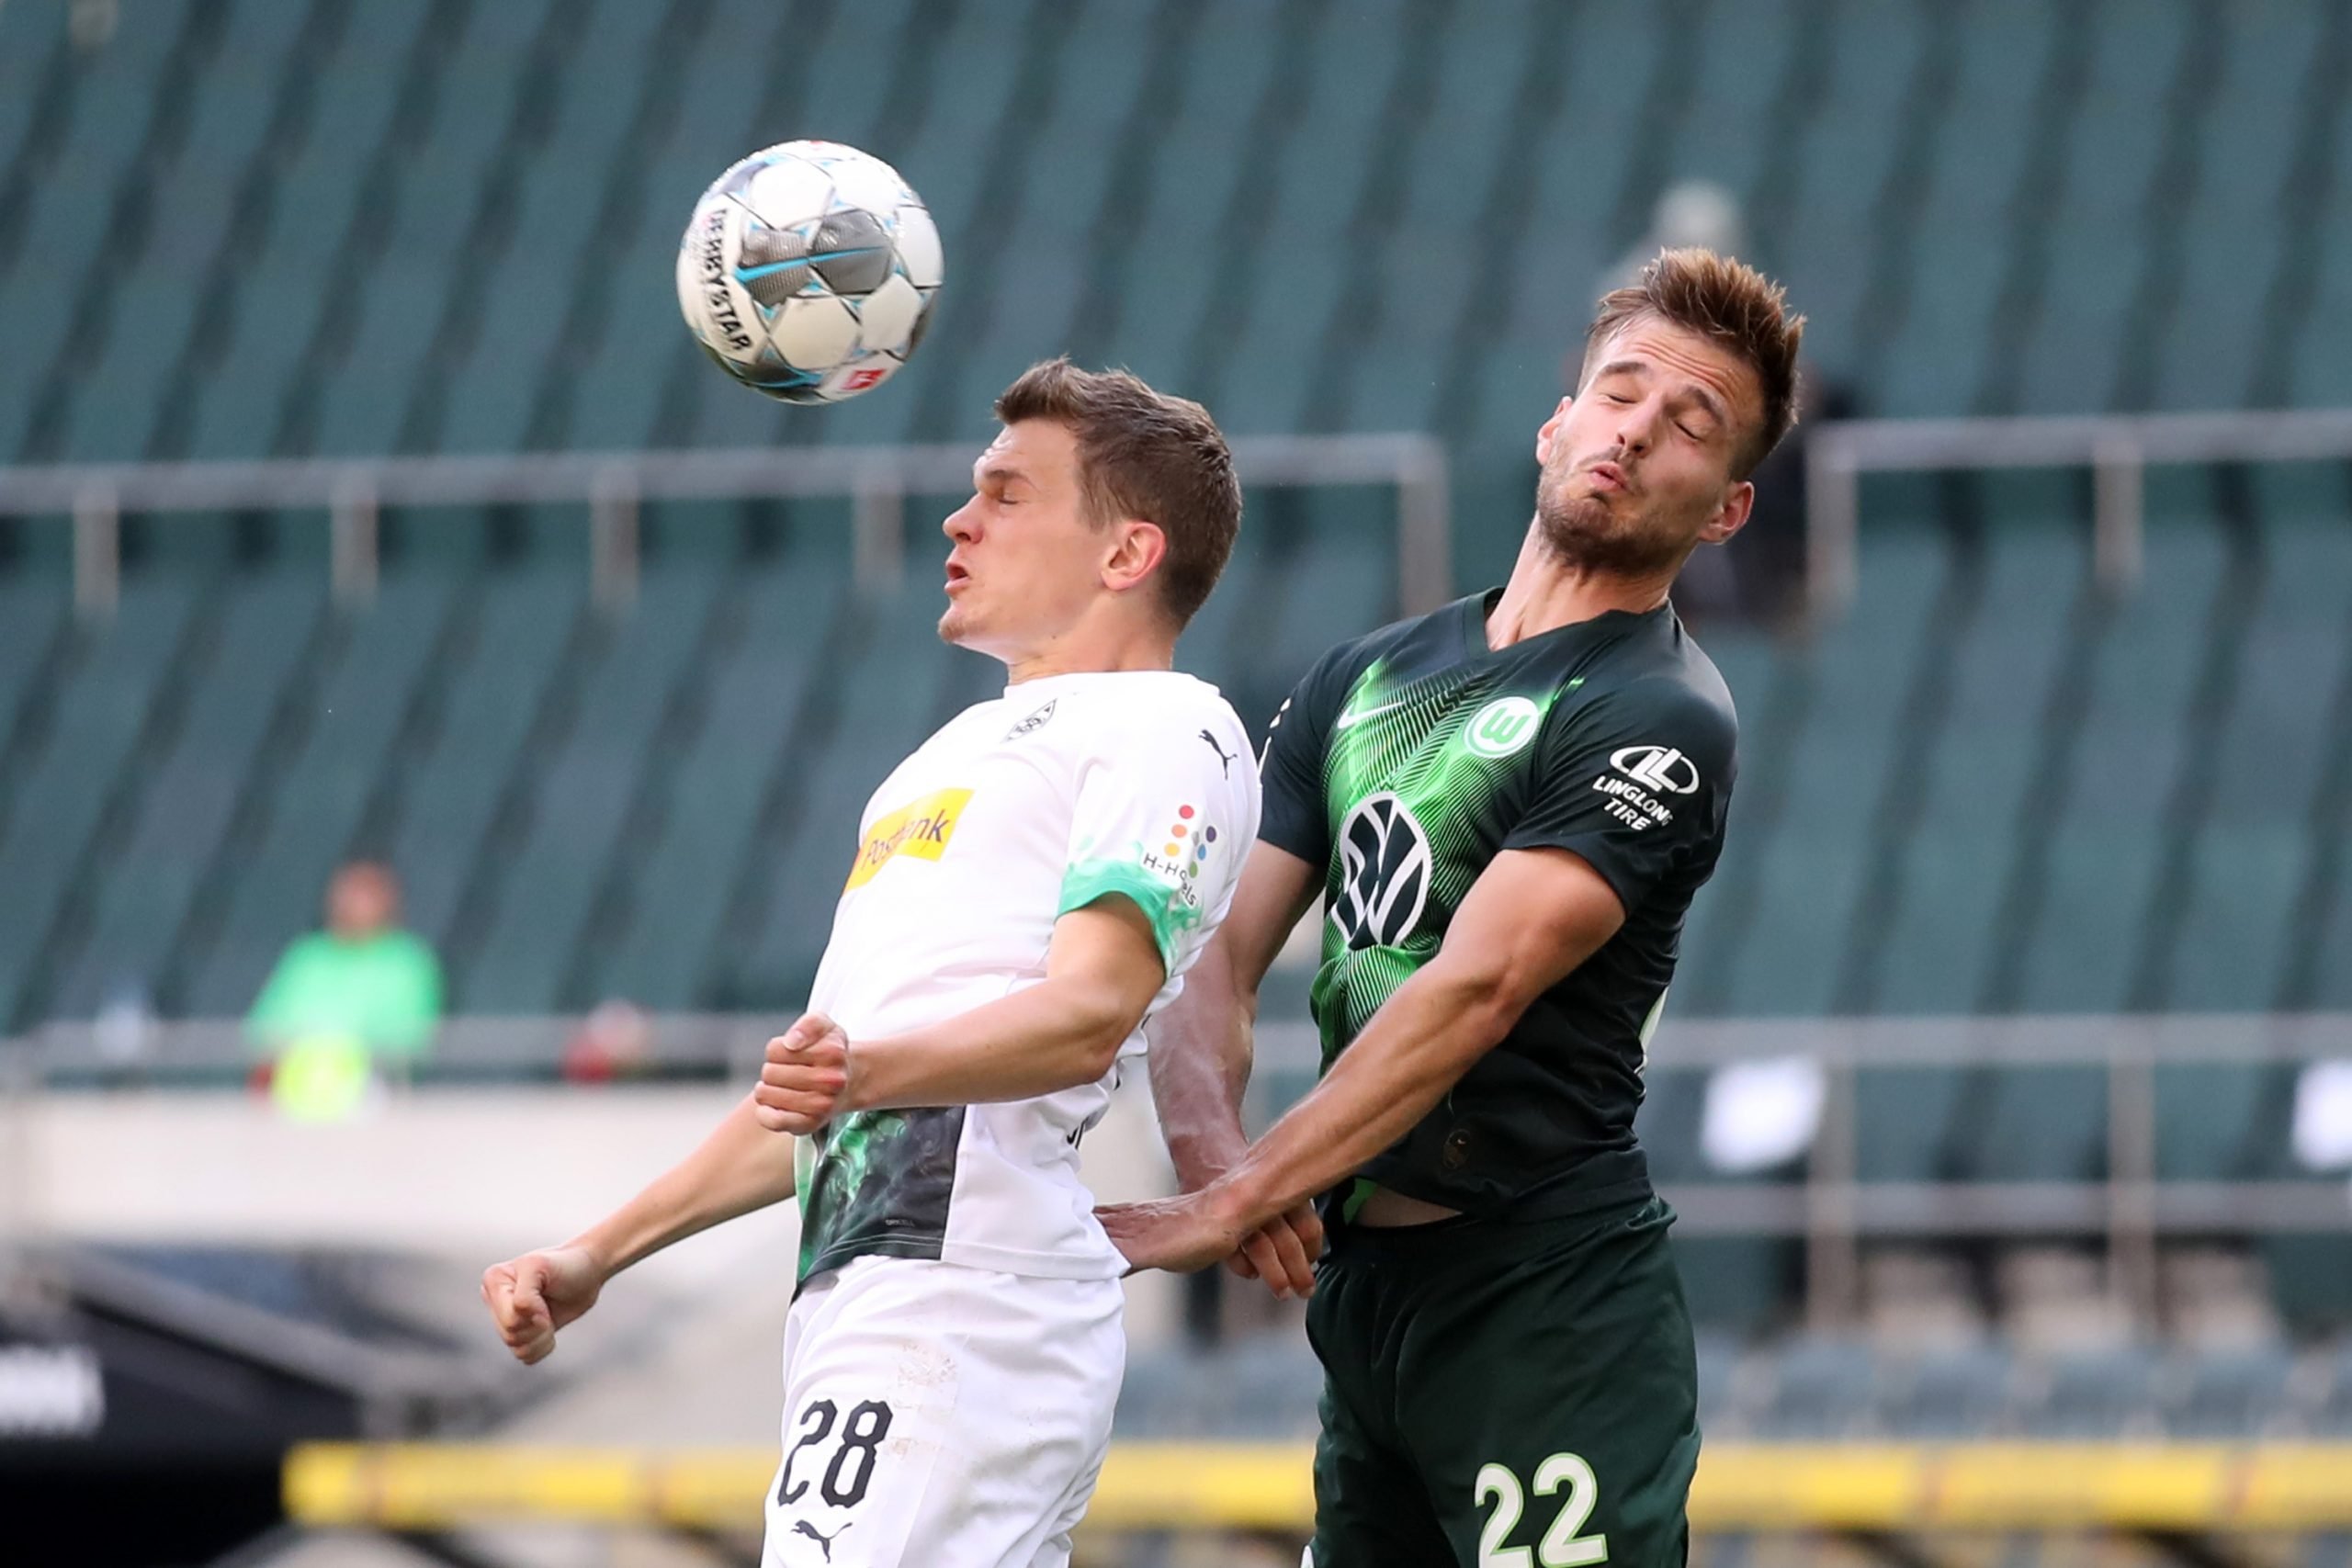 Marin Pongracic of VfL Wolfsburg and Matthias Ginter of Borussia Moenchengladbach compete for a header during the Bundesliga match between Borussia Moenchengladbach and VfL Wolfsburg at Borussia-Park on June 16, 2020 in Moenchengladbach, Germany. (Photo by Alex Grimm/Getty Images)